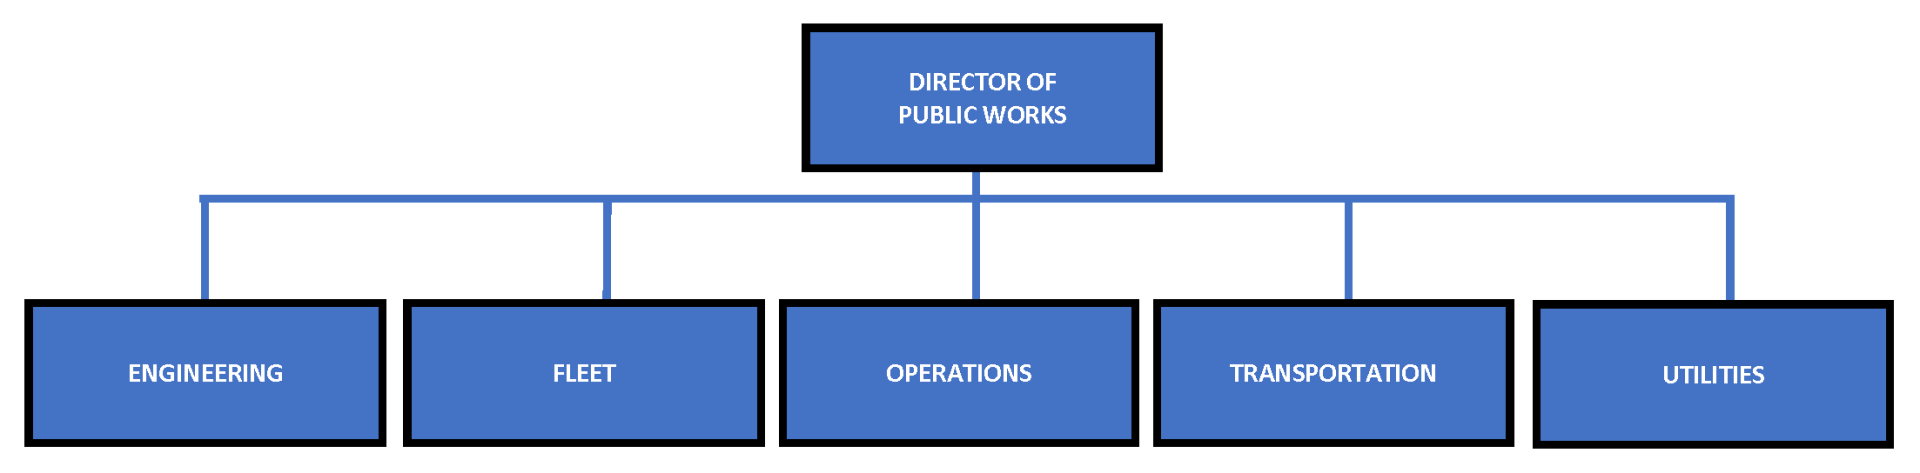 Public Works Org Chart